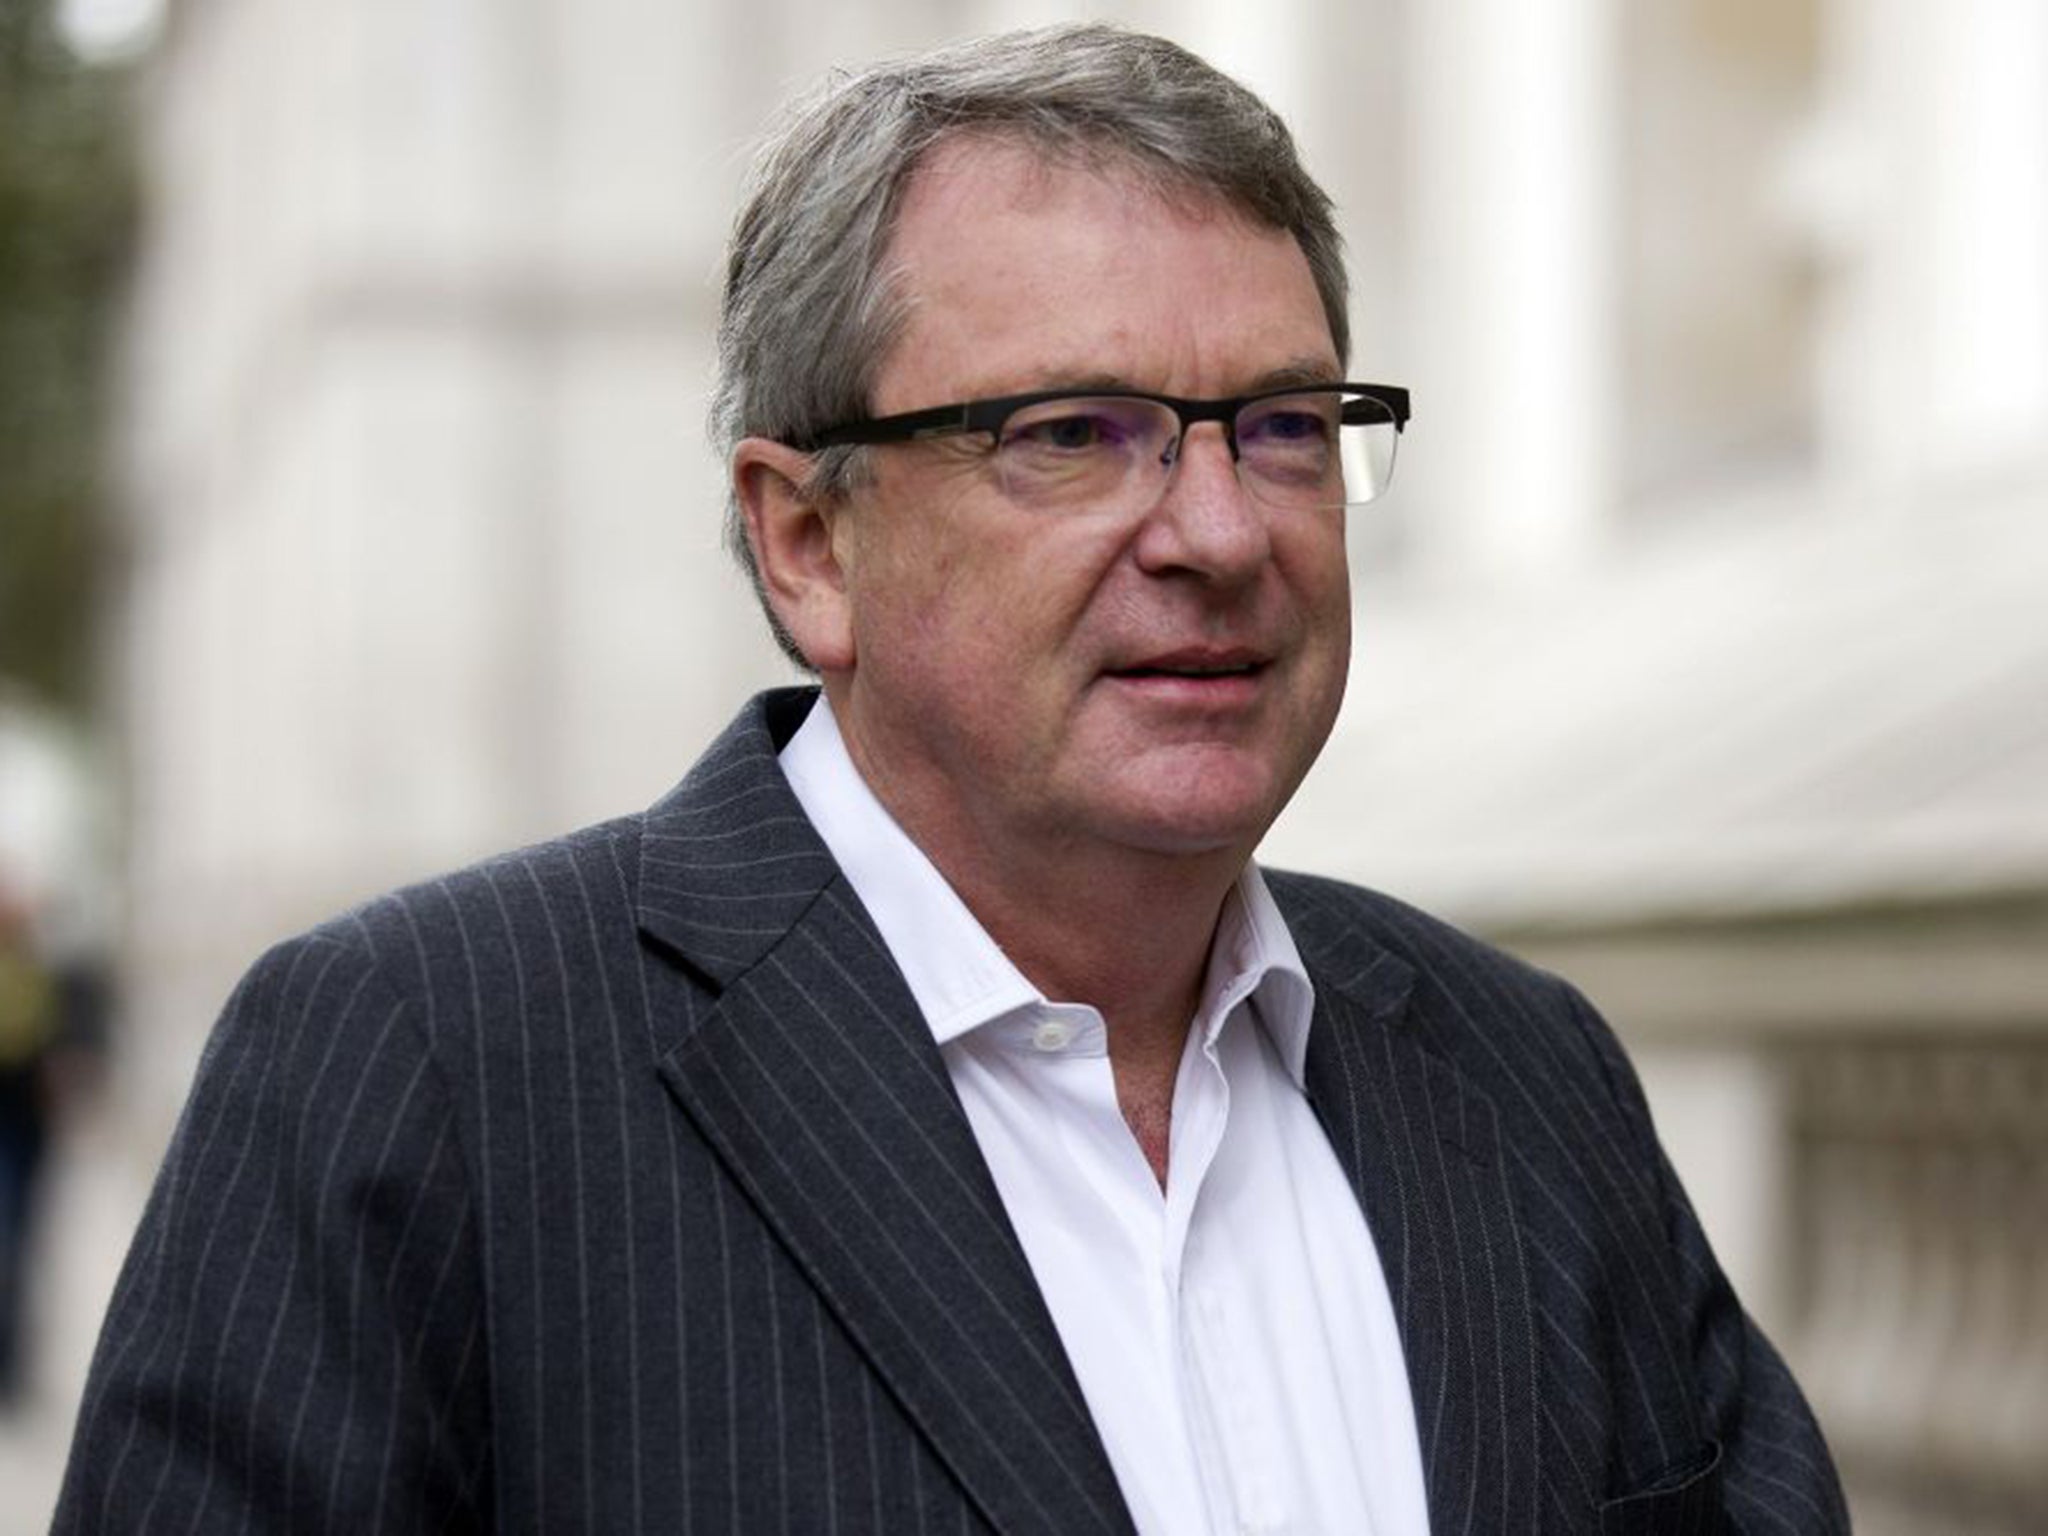 Lynton Crosby - the undisputed supremo of the Tory campaign